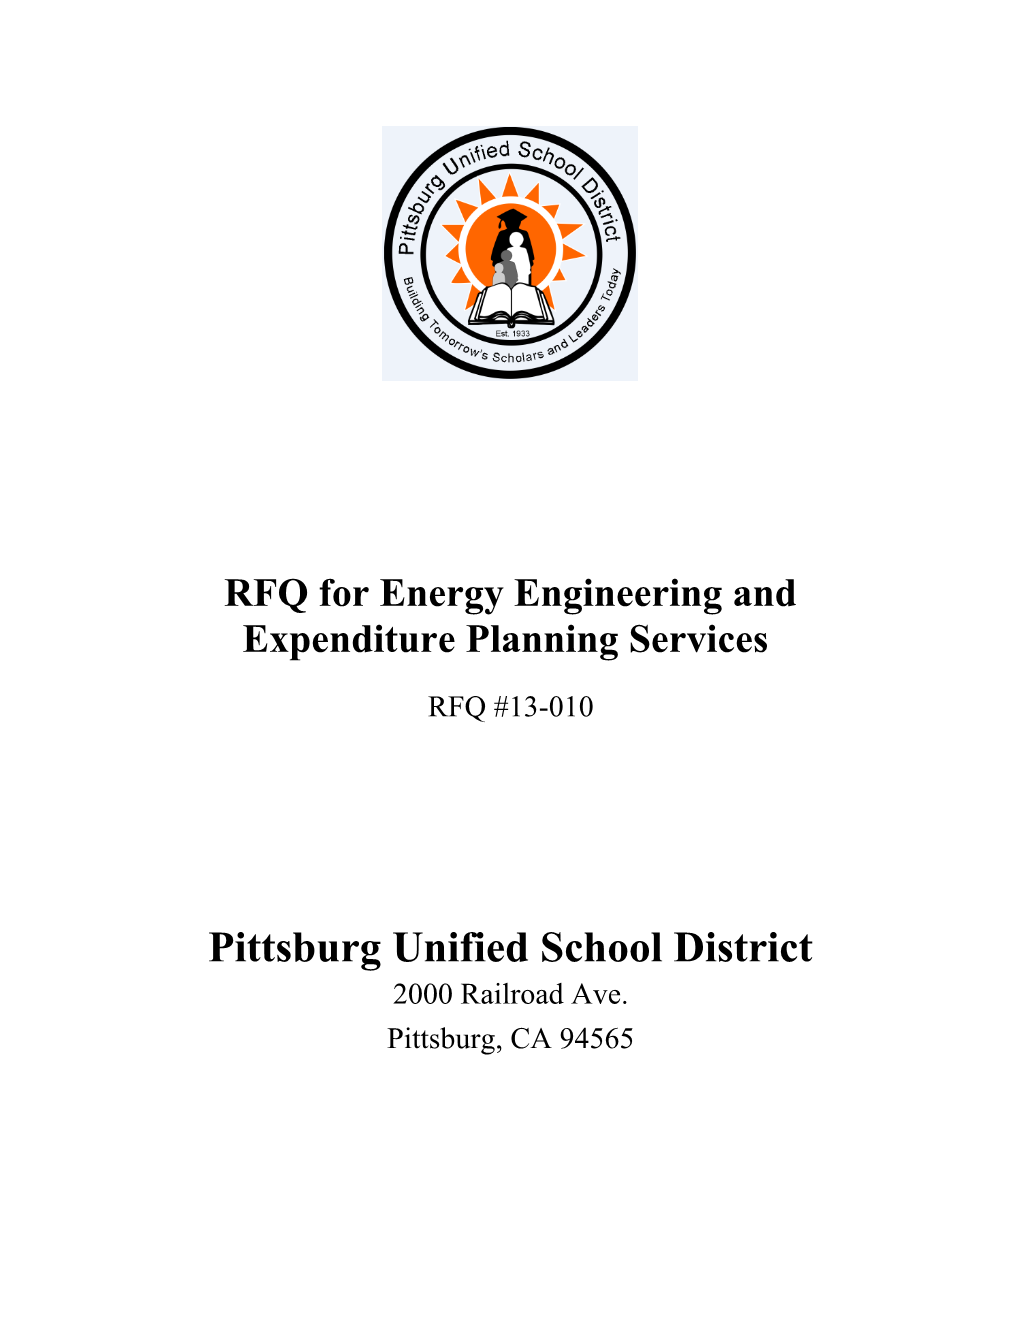 Sample RFQ for Energy Engineering Services and Energy Expenditure Planning